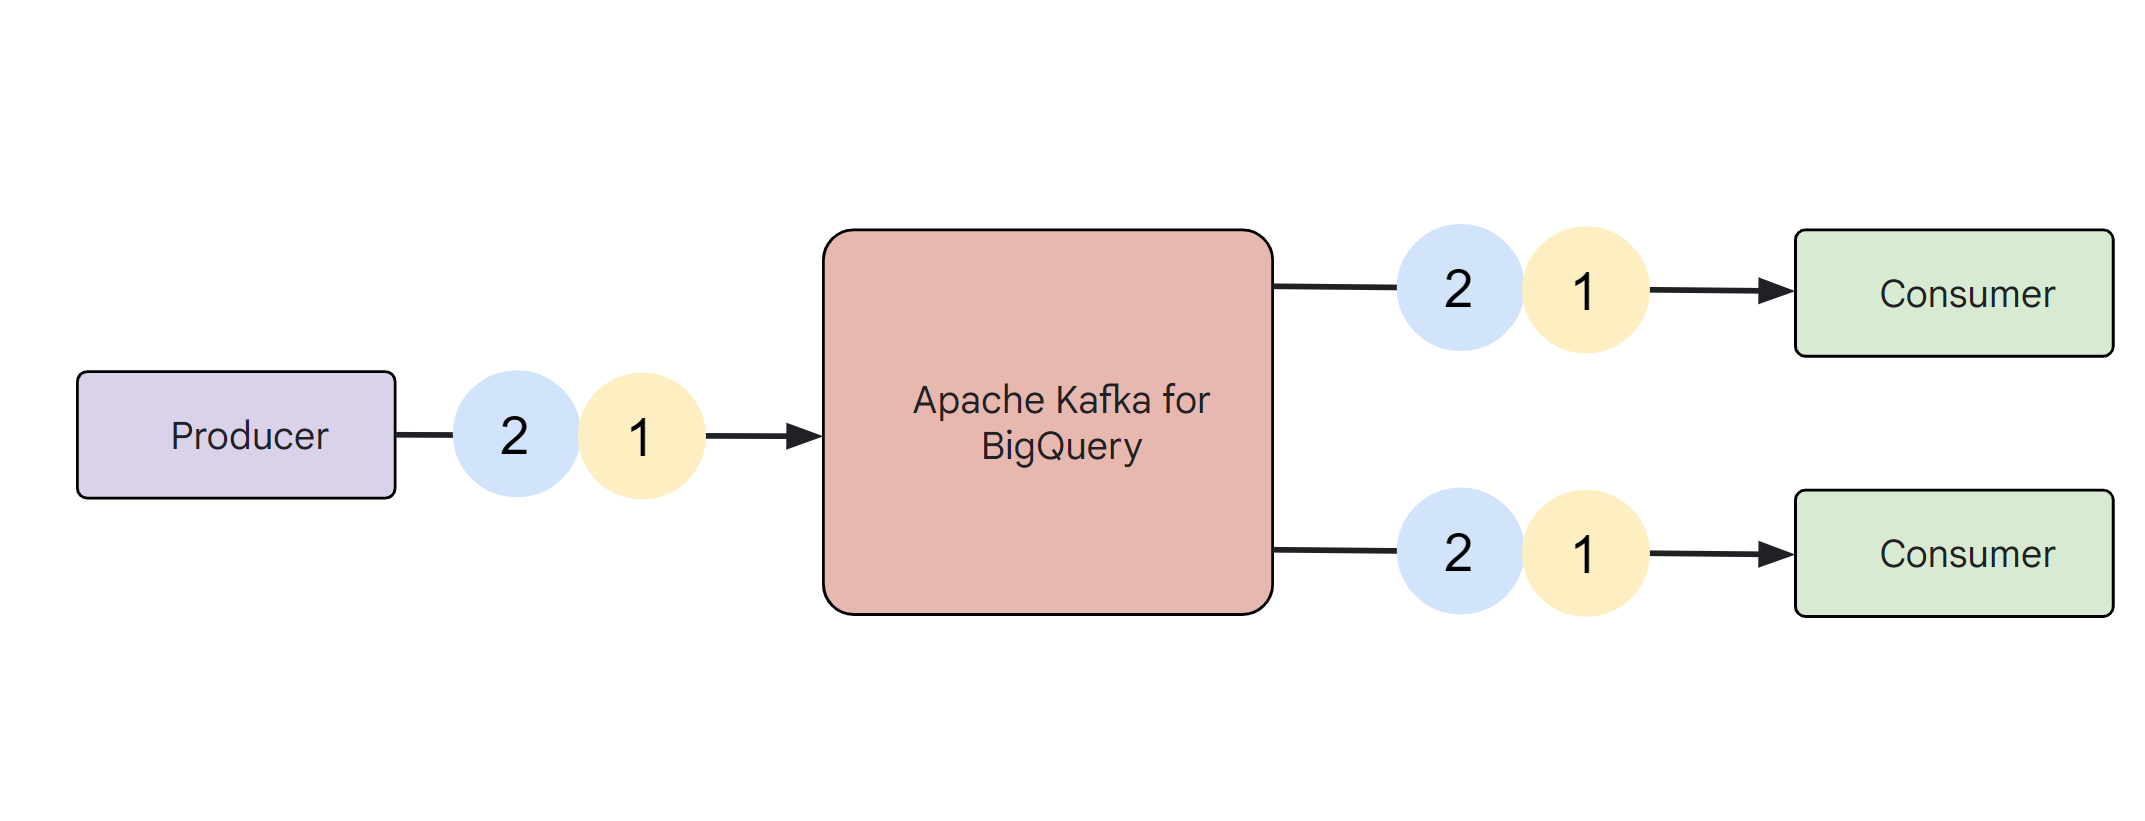 Message flow for Apache Kafka for BigQuery.